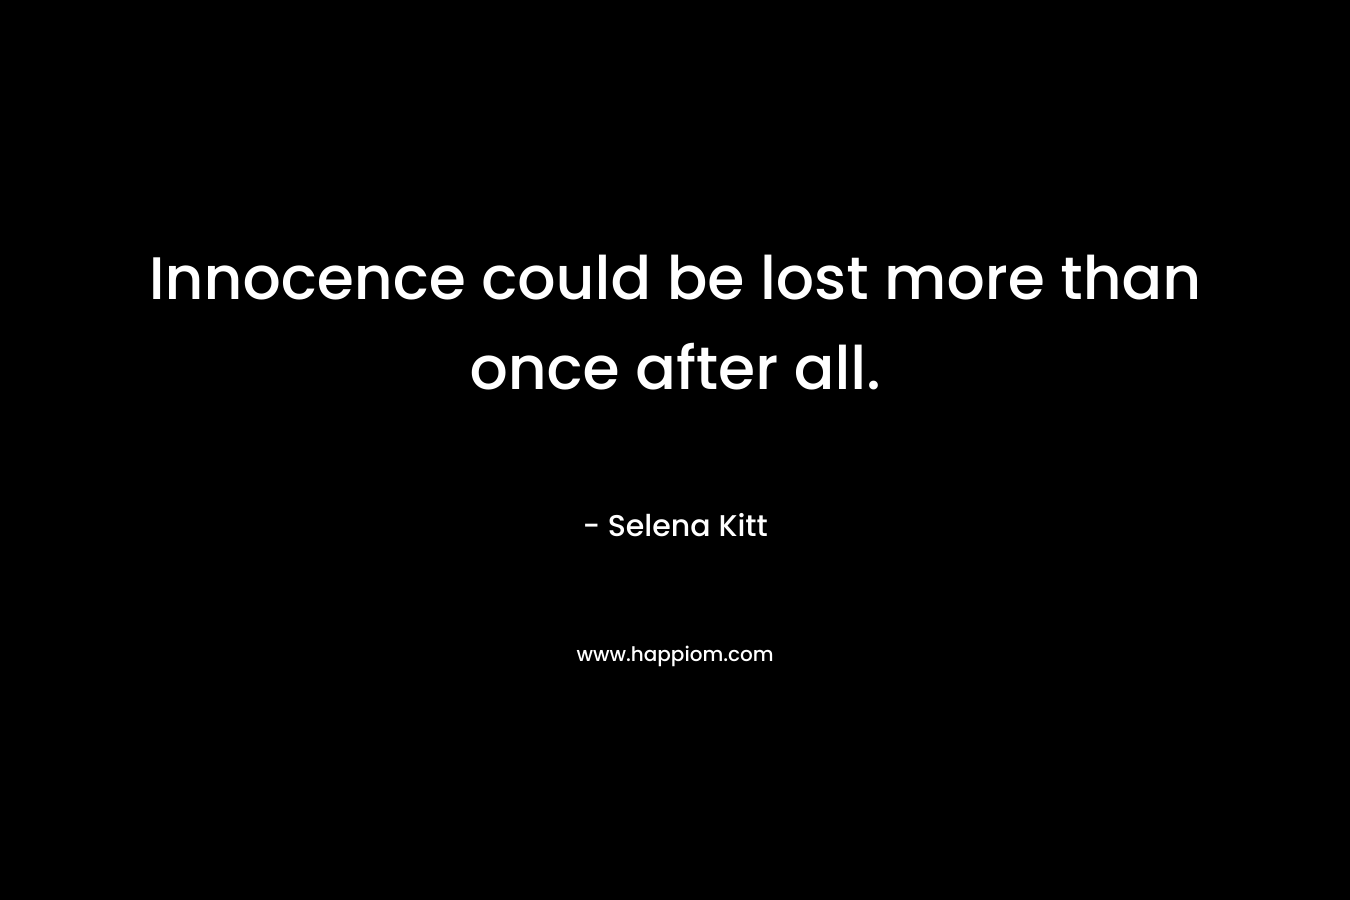 Innocence could be lost more than once after all. – Selena Kitt